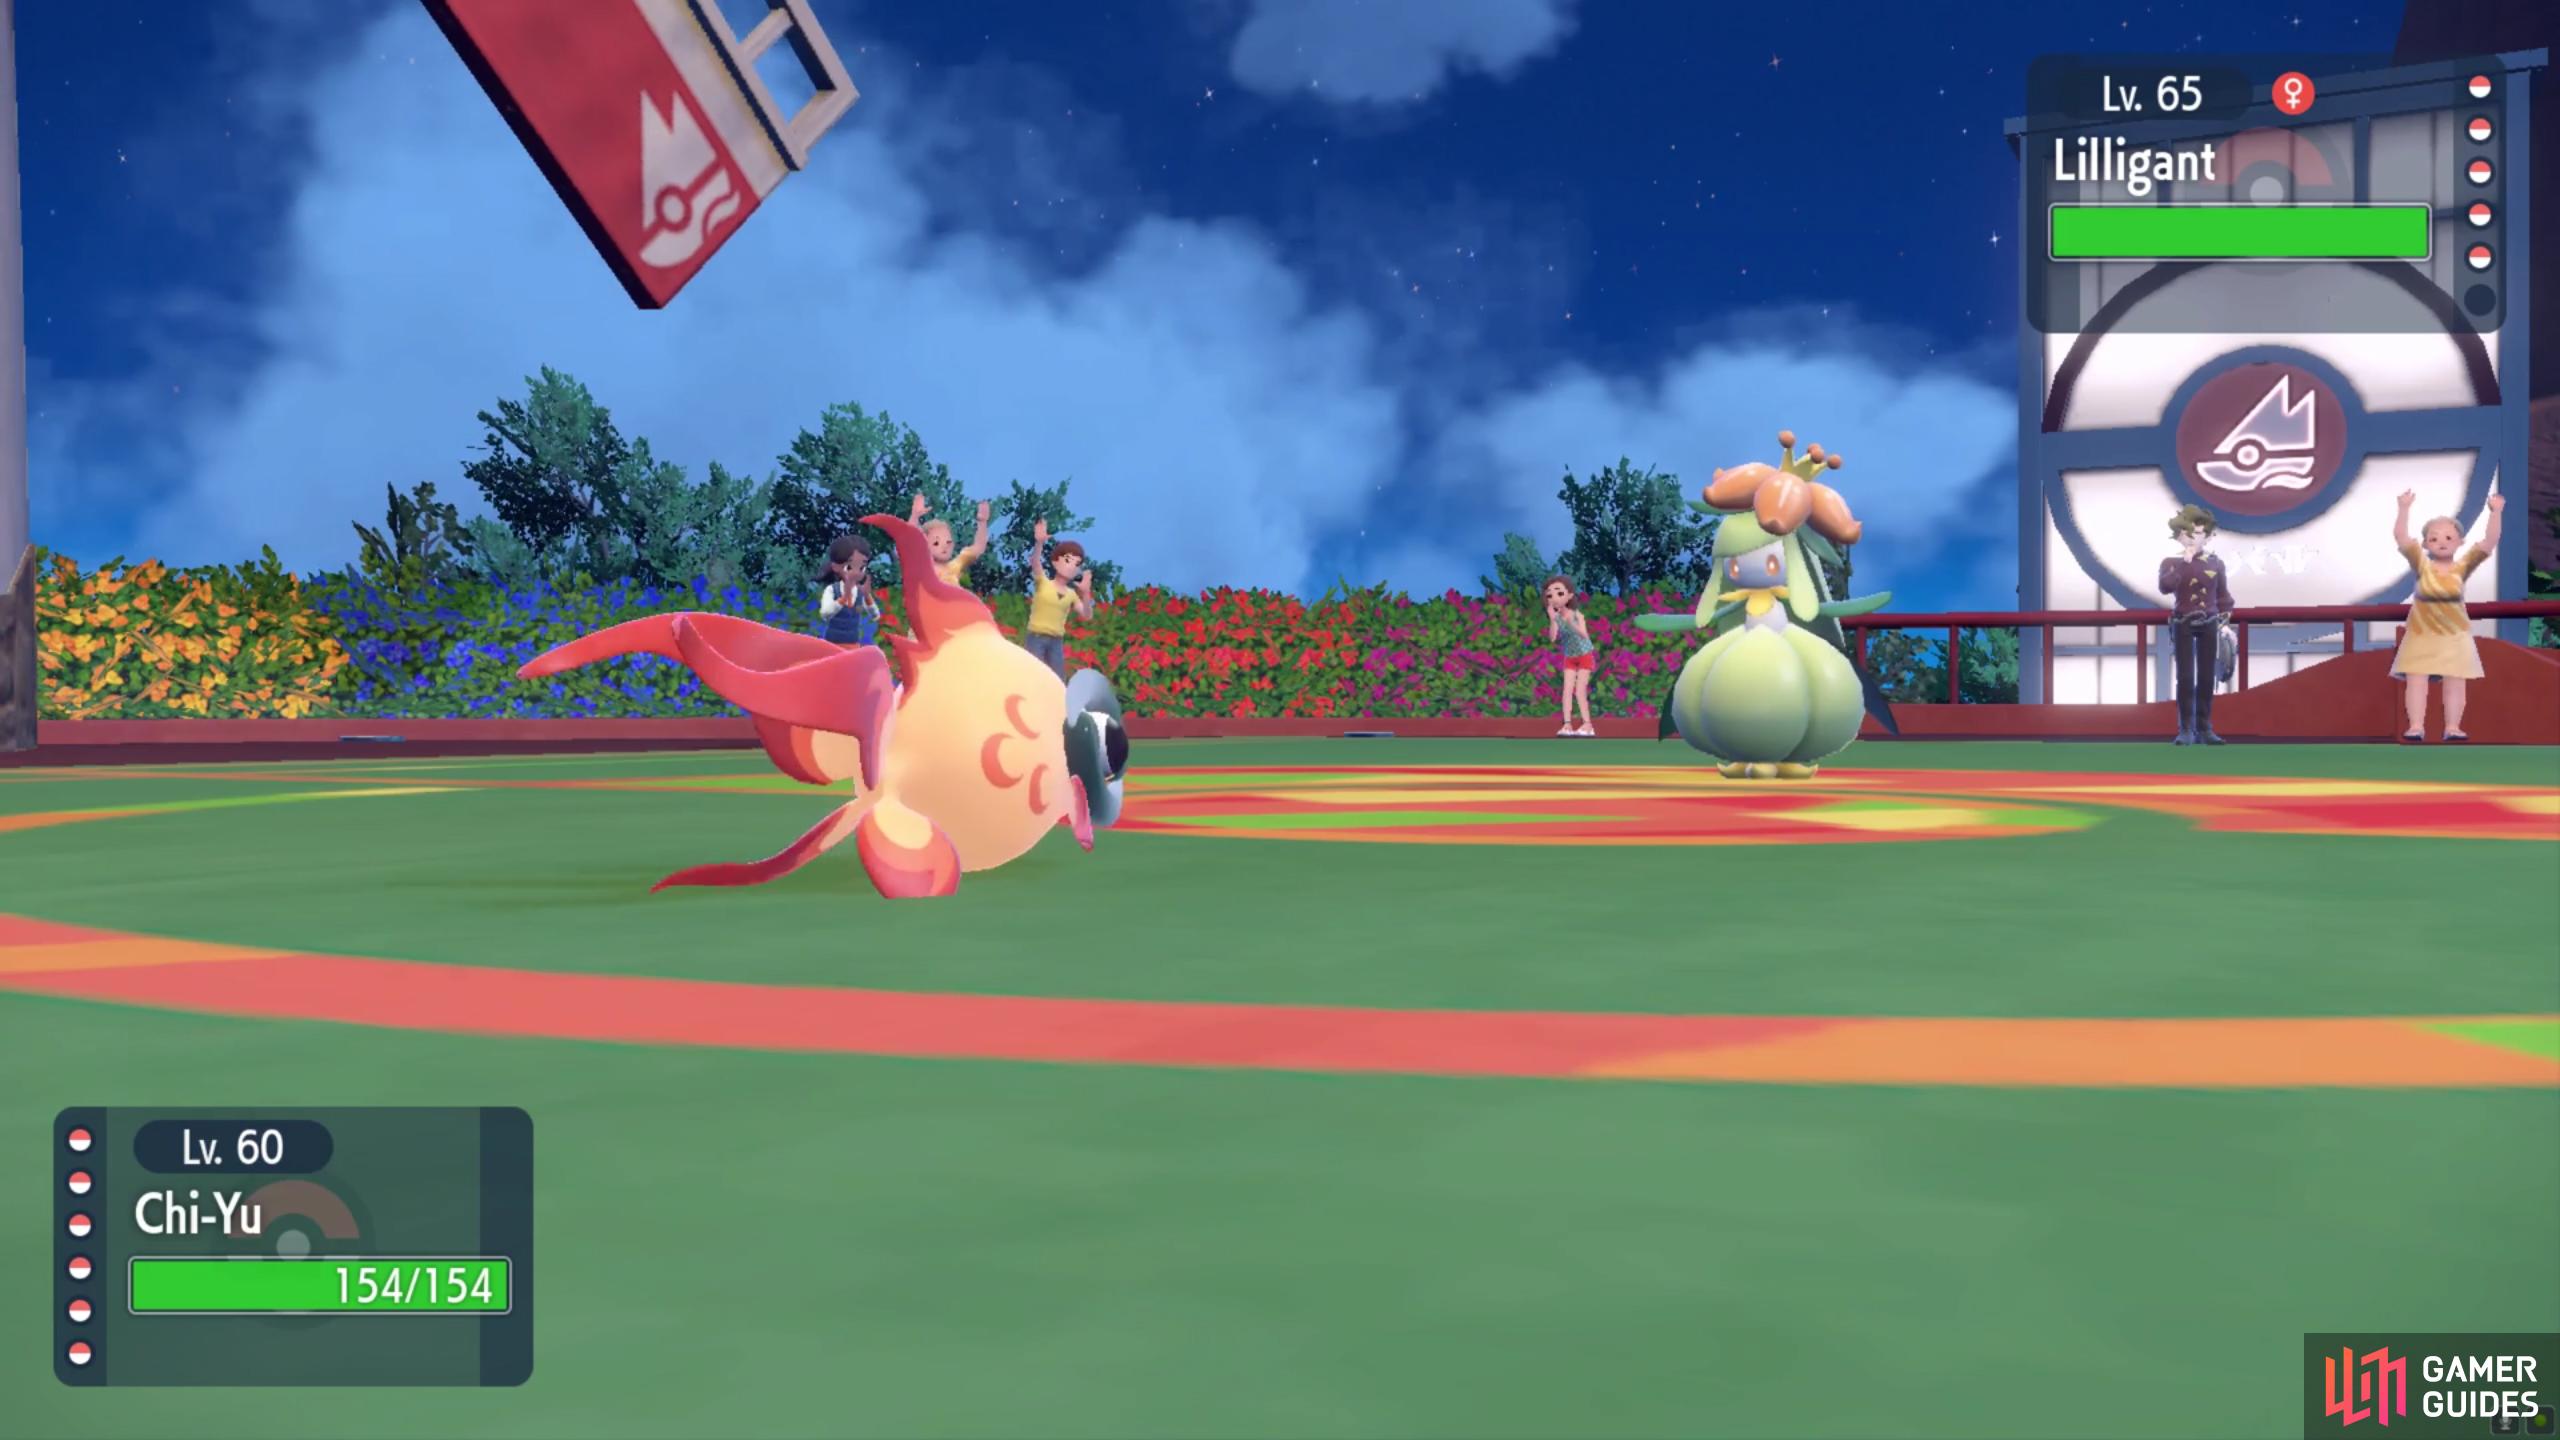 Lilligant is held back by poor move synergy.